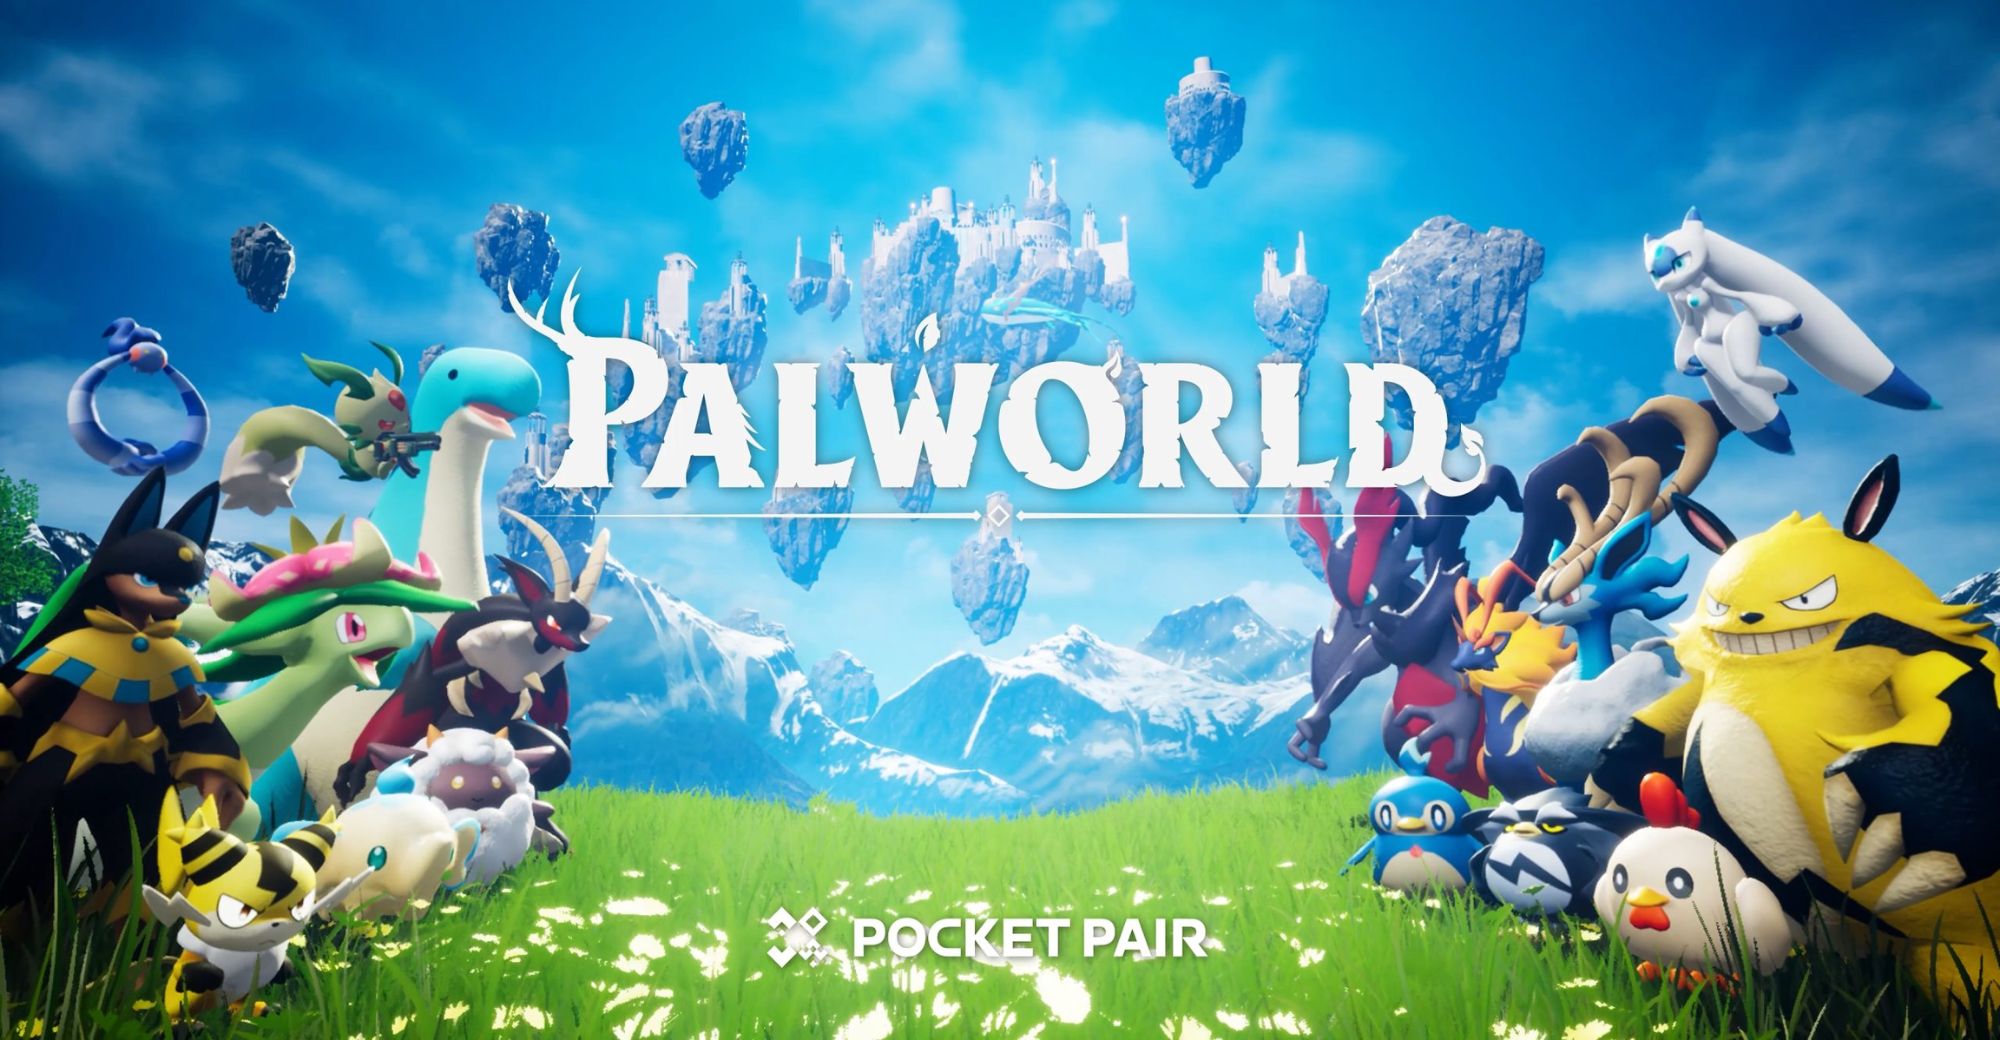 Tencent and Alibaba Engage in Price War for Palworld